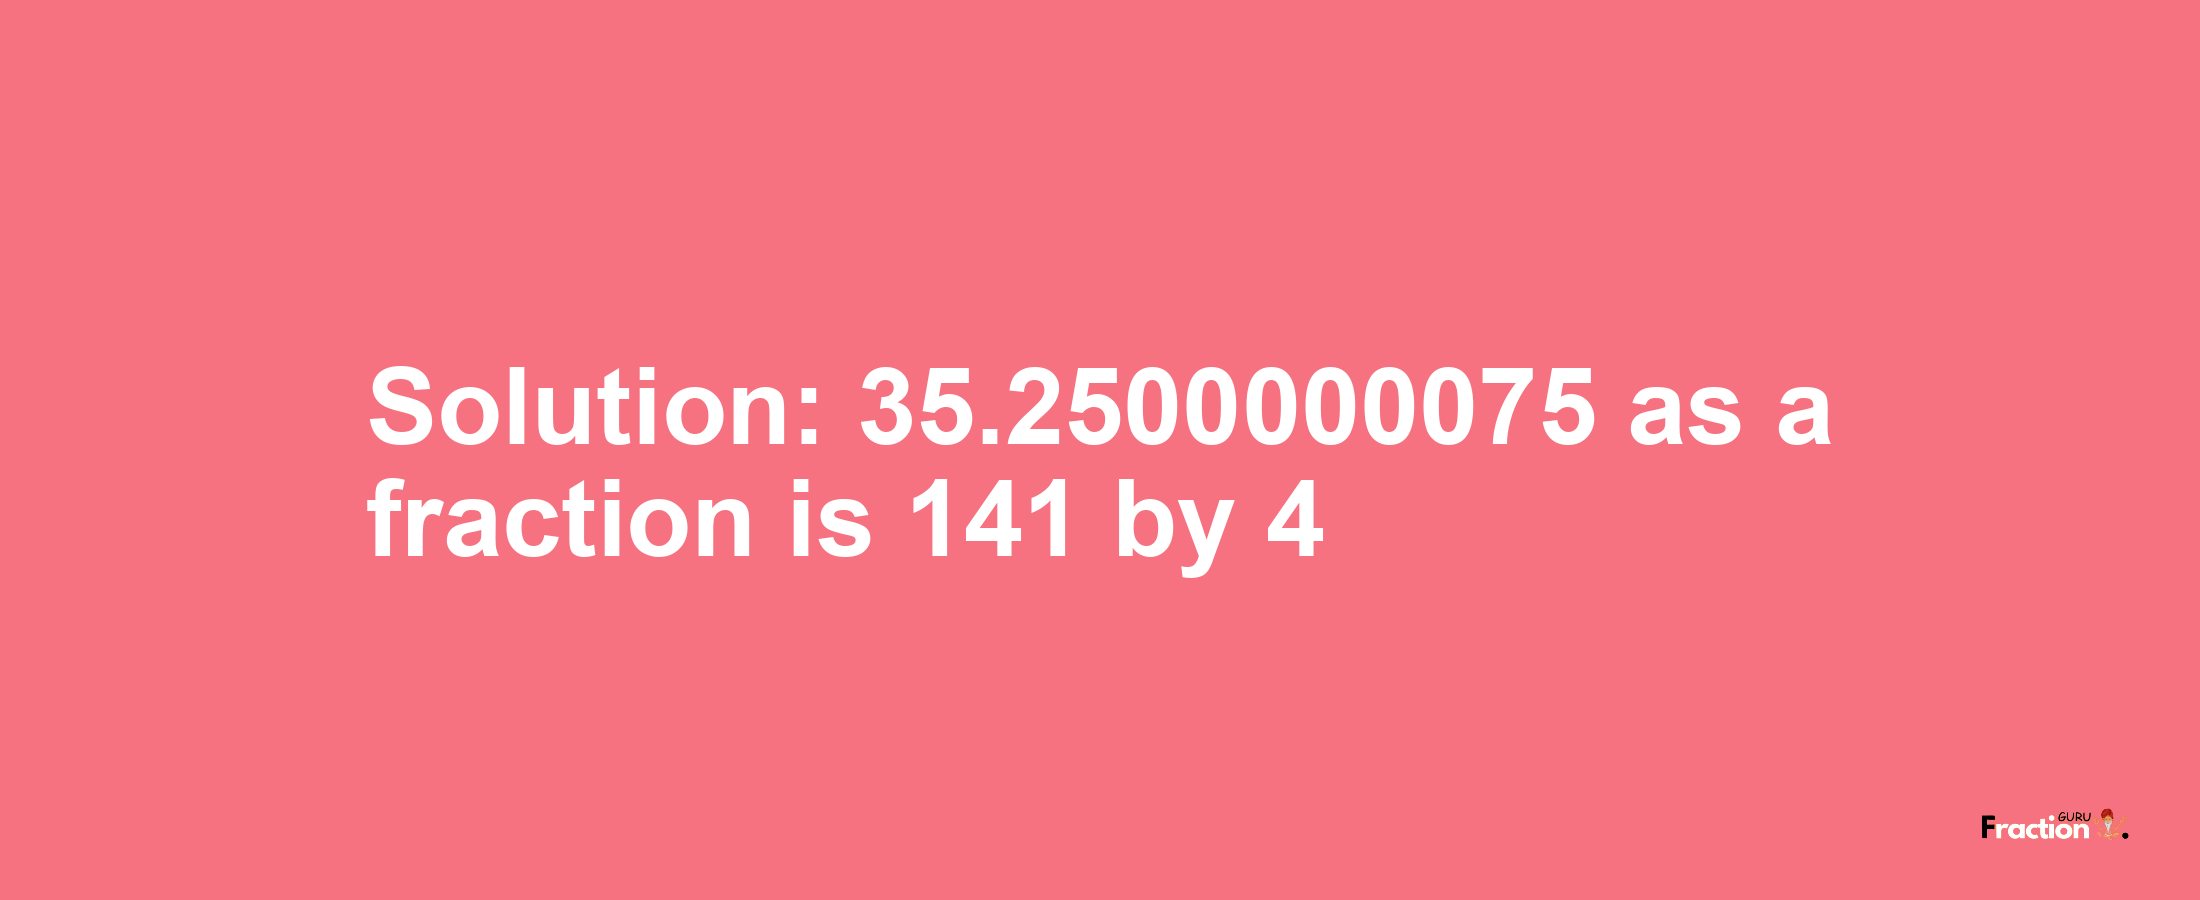 Solution:35.2500000075 as a fraction is 141/4